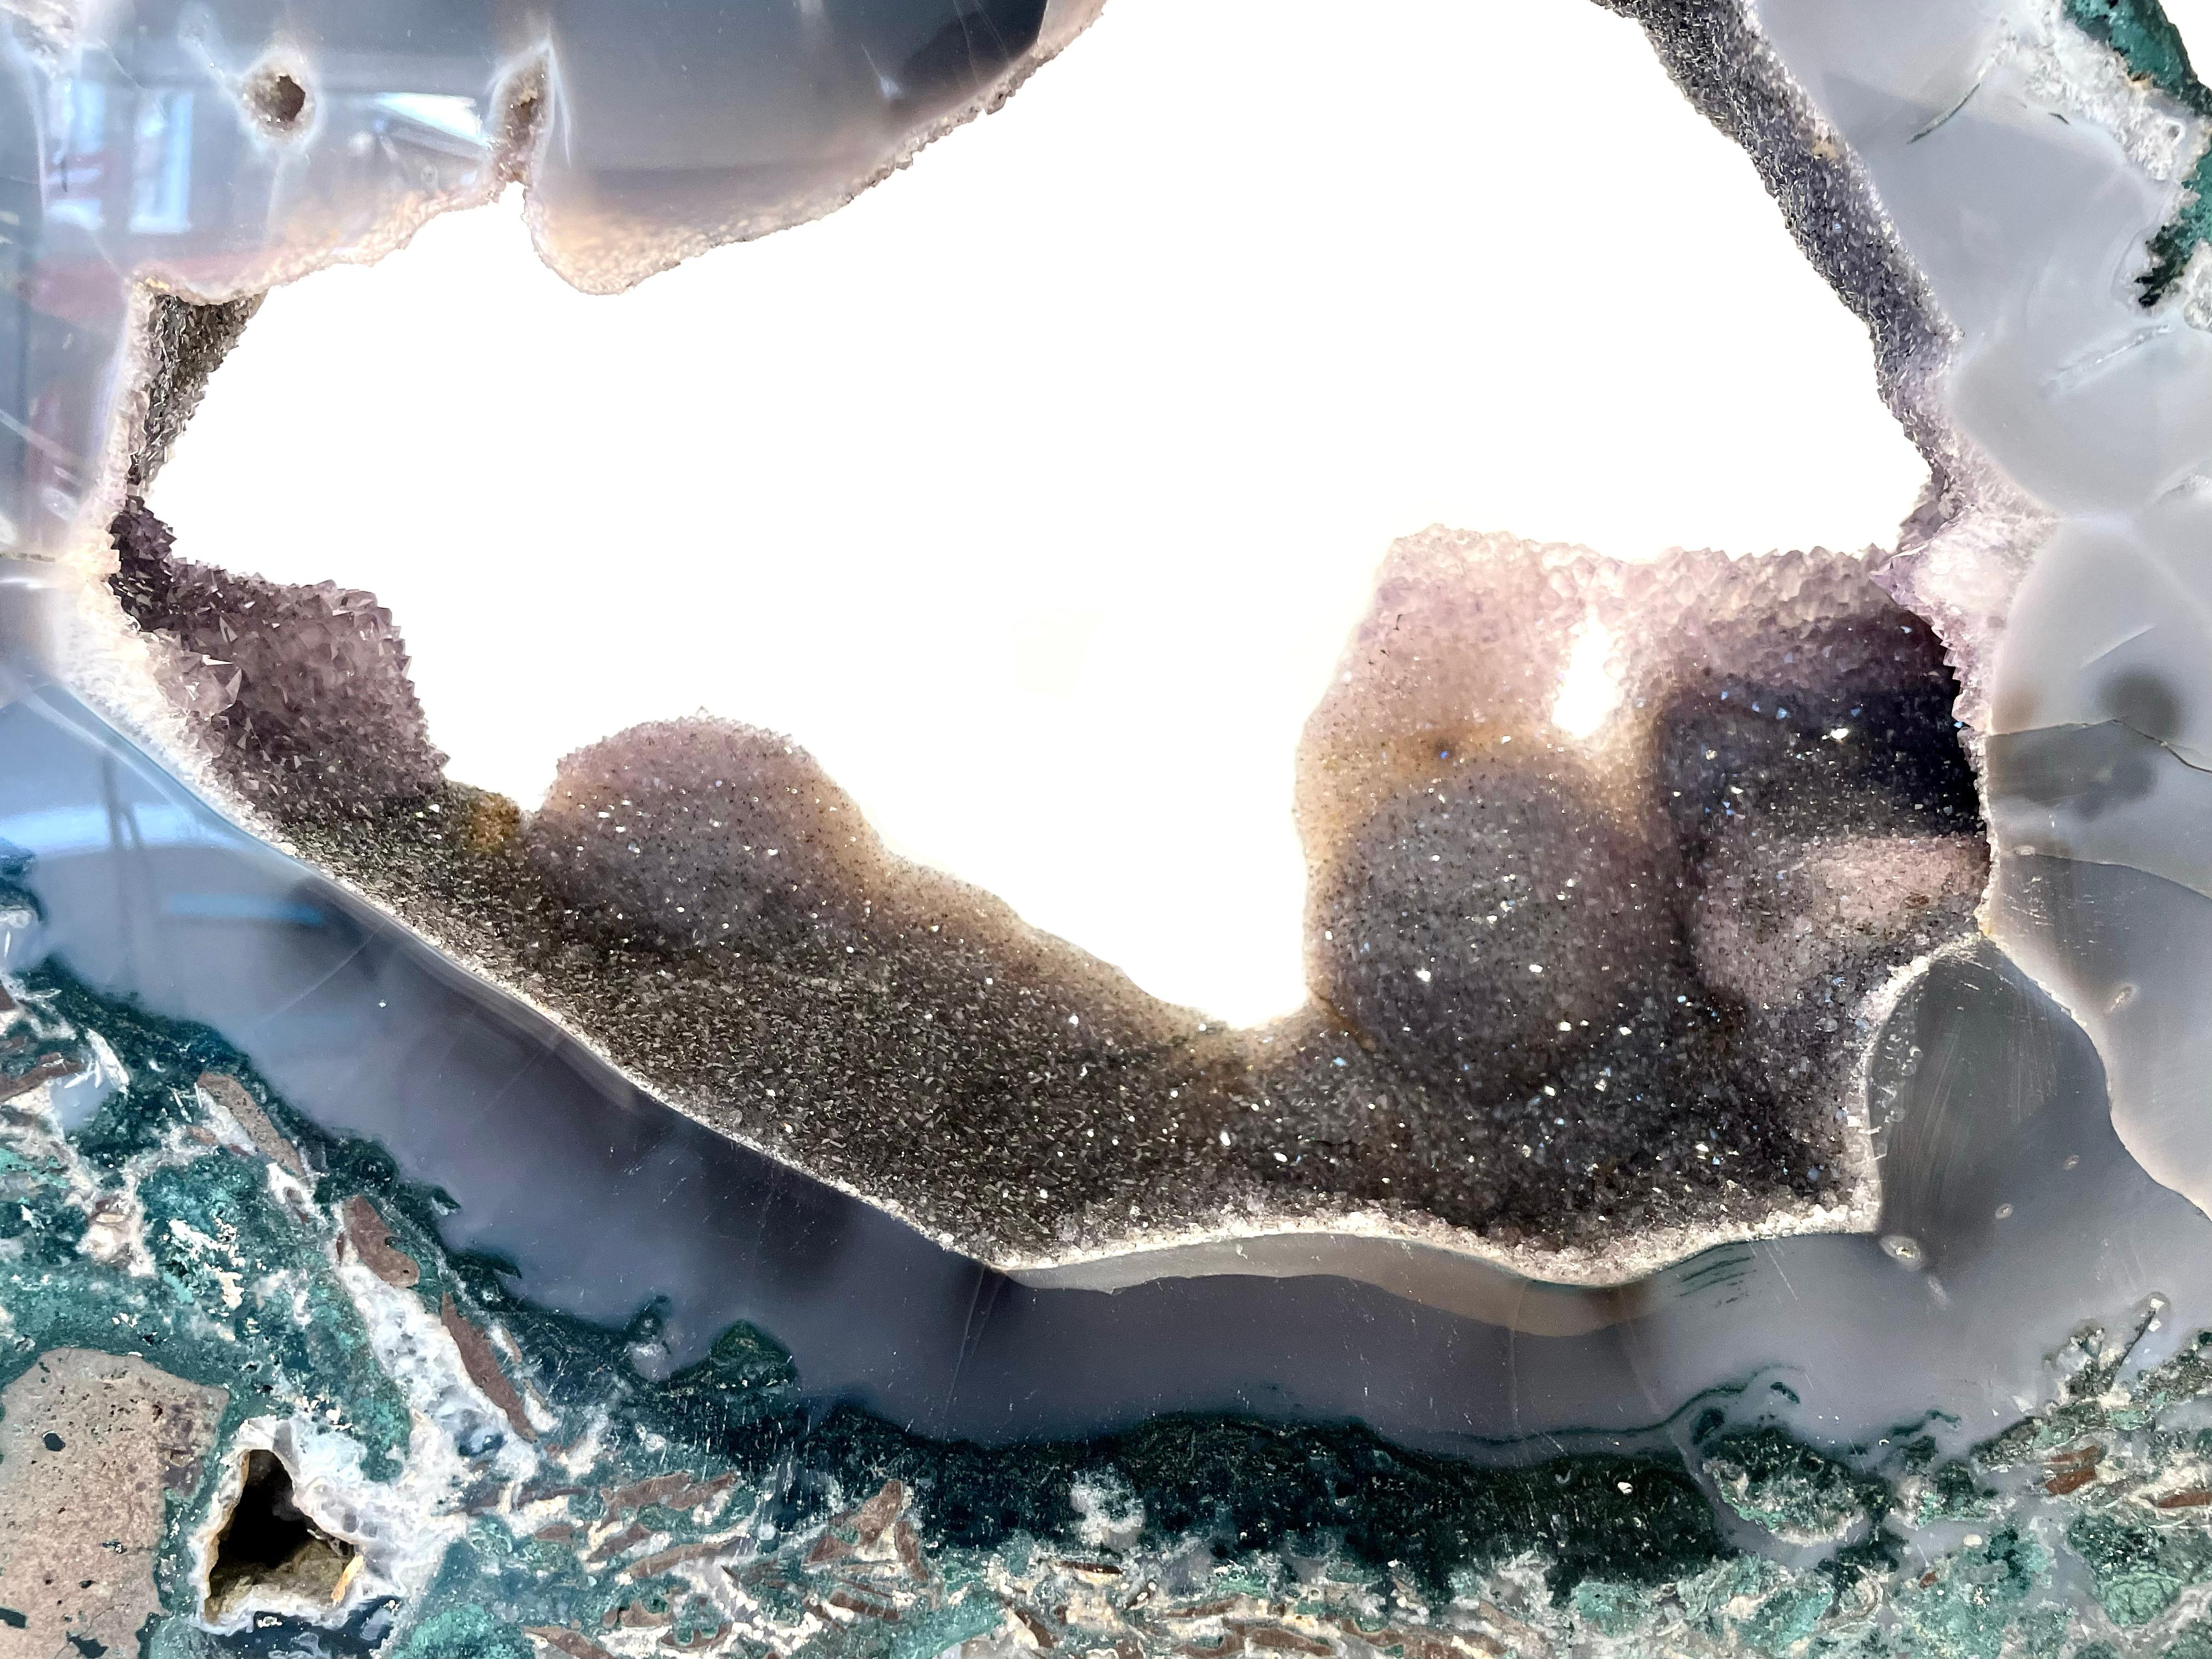 This stunning, shimmering agate crystal slice is accompanied by amethyst and quartz crystal deposits. The crystal is in excellent condition and accompanied with a bespoke display stand. 

Ethically sourced in Rio Grande du Sul, Brazil, the piece is